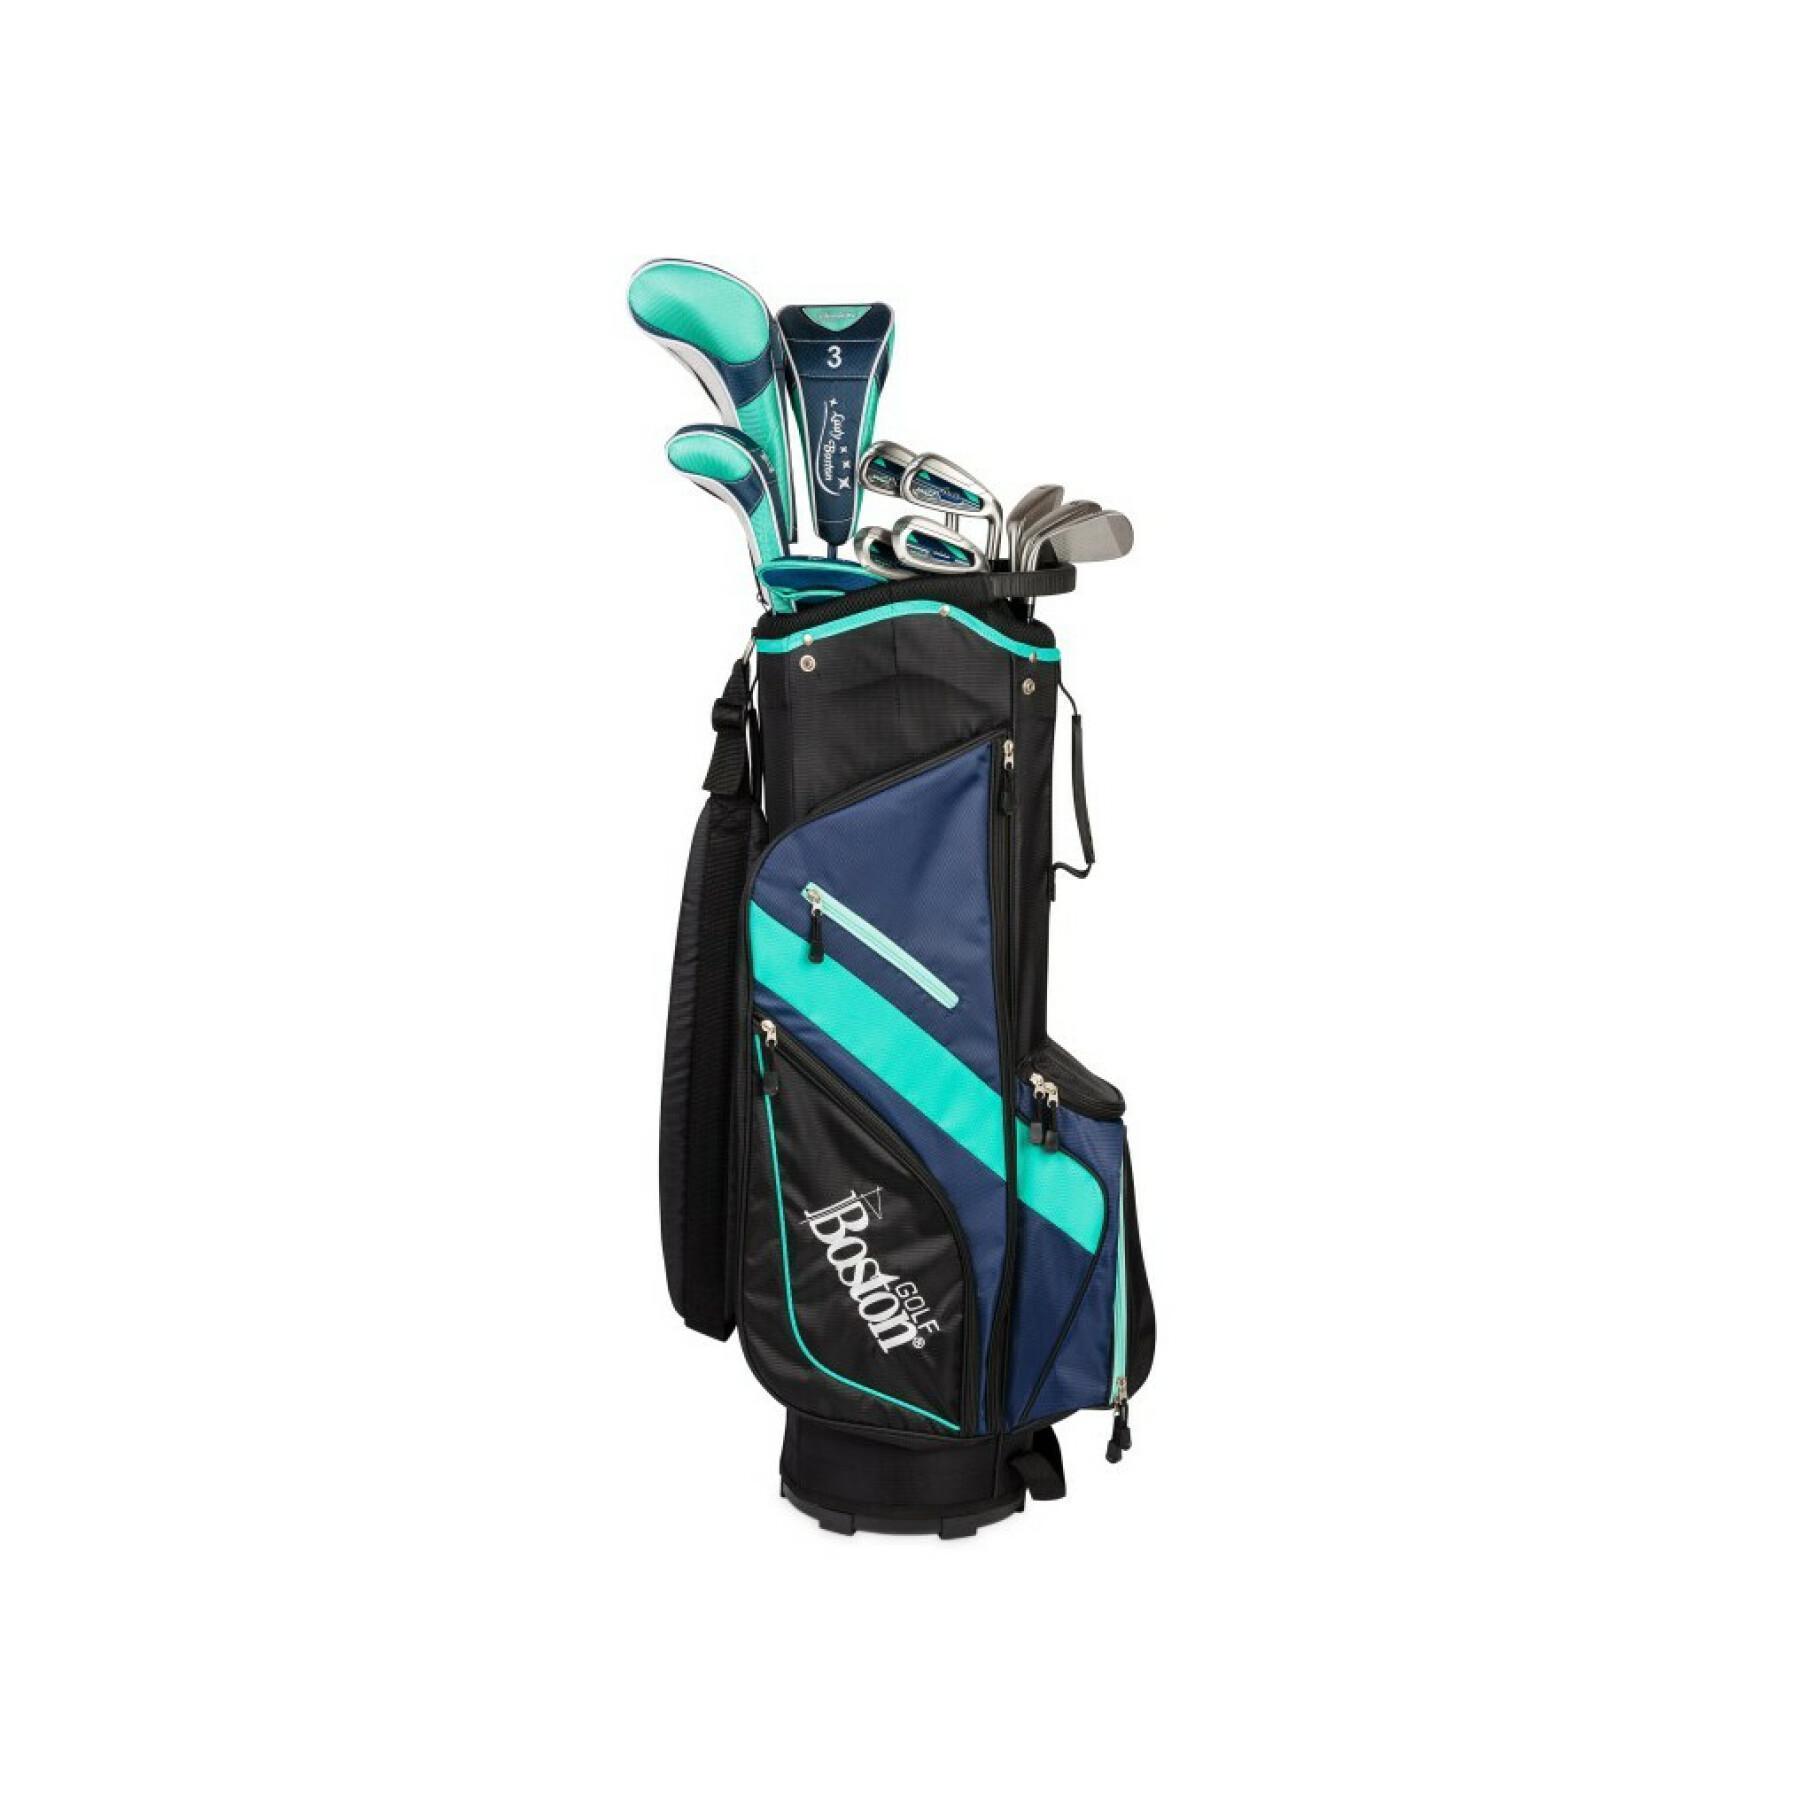 Kit (bag + 11 clubs) left-handed woman Boston Golf pack complet 9"